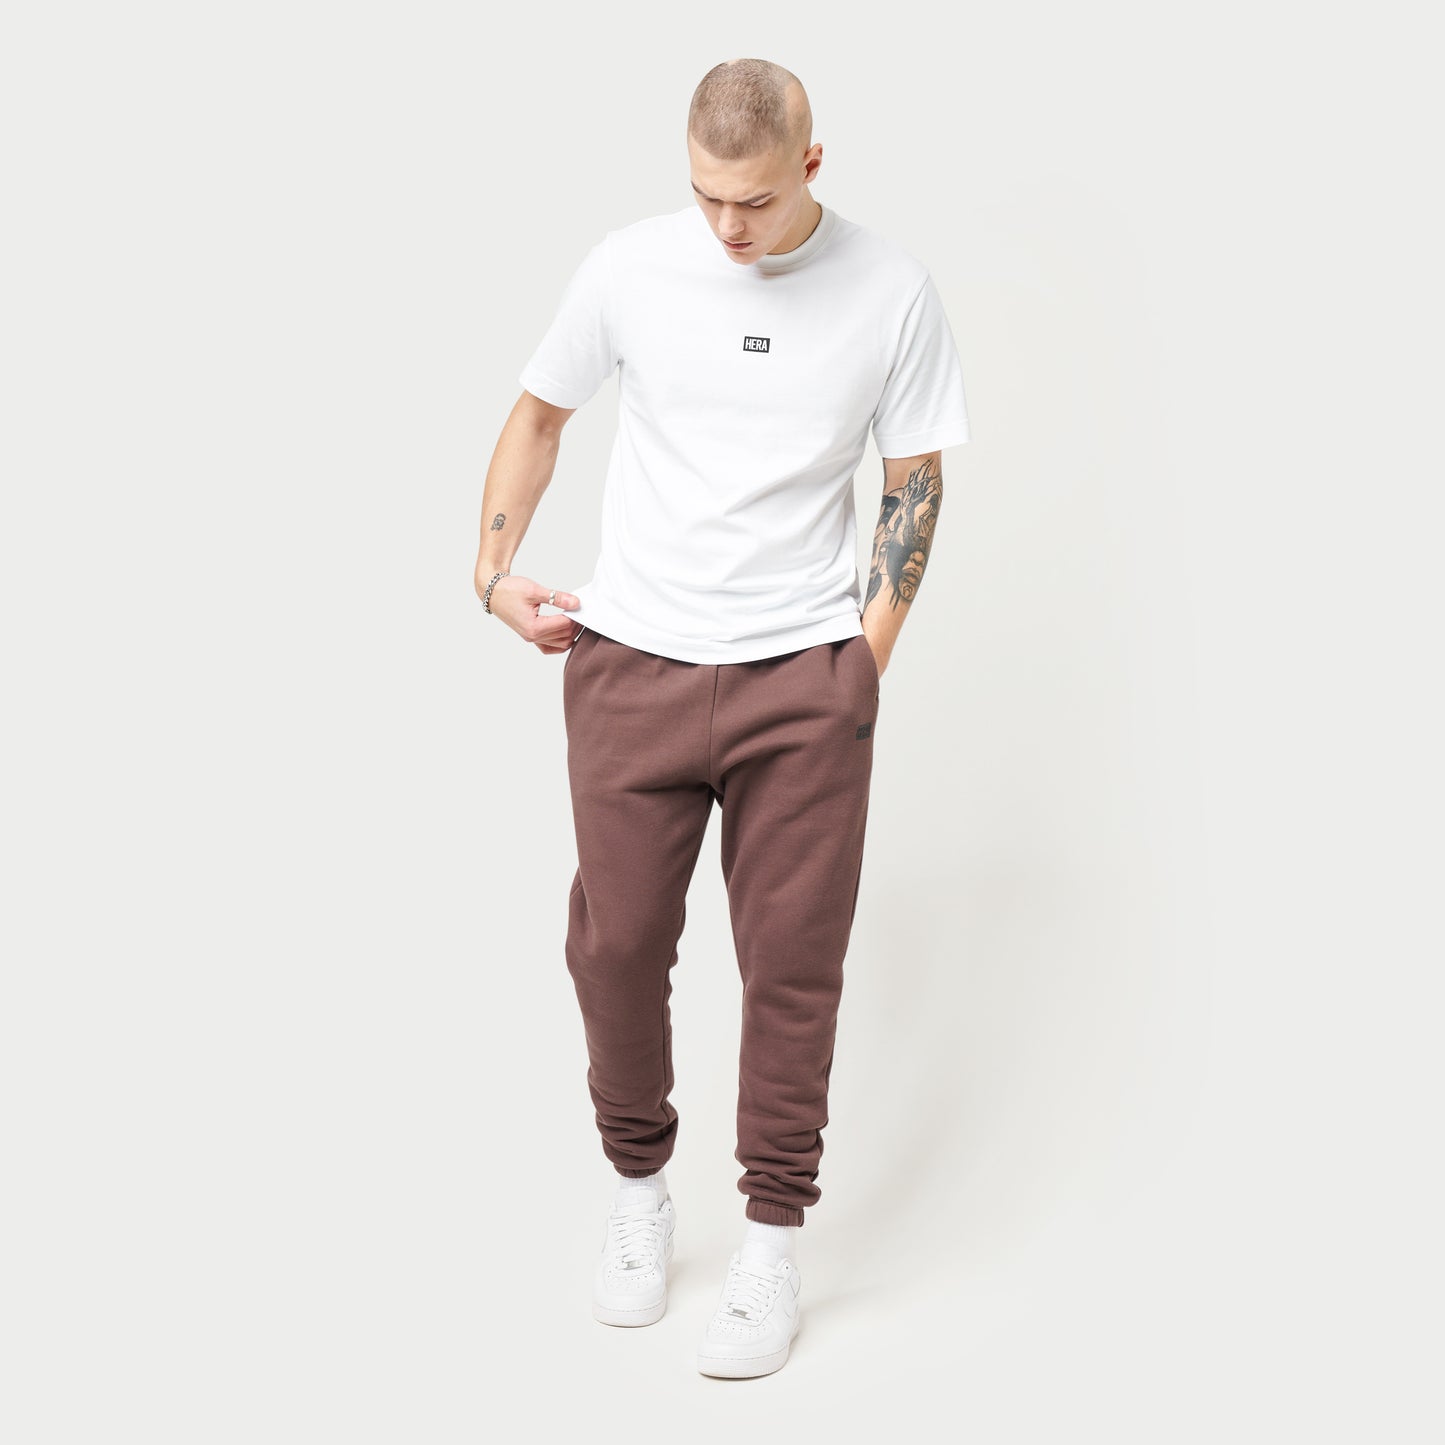 Mens Collective Sweatpant - Slate Brown